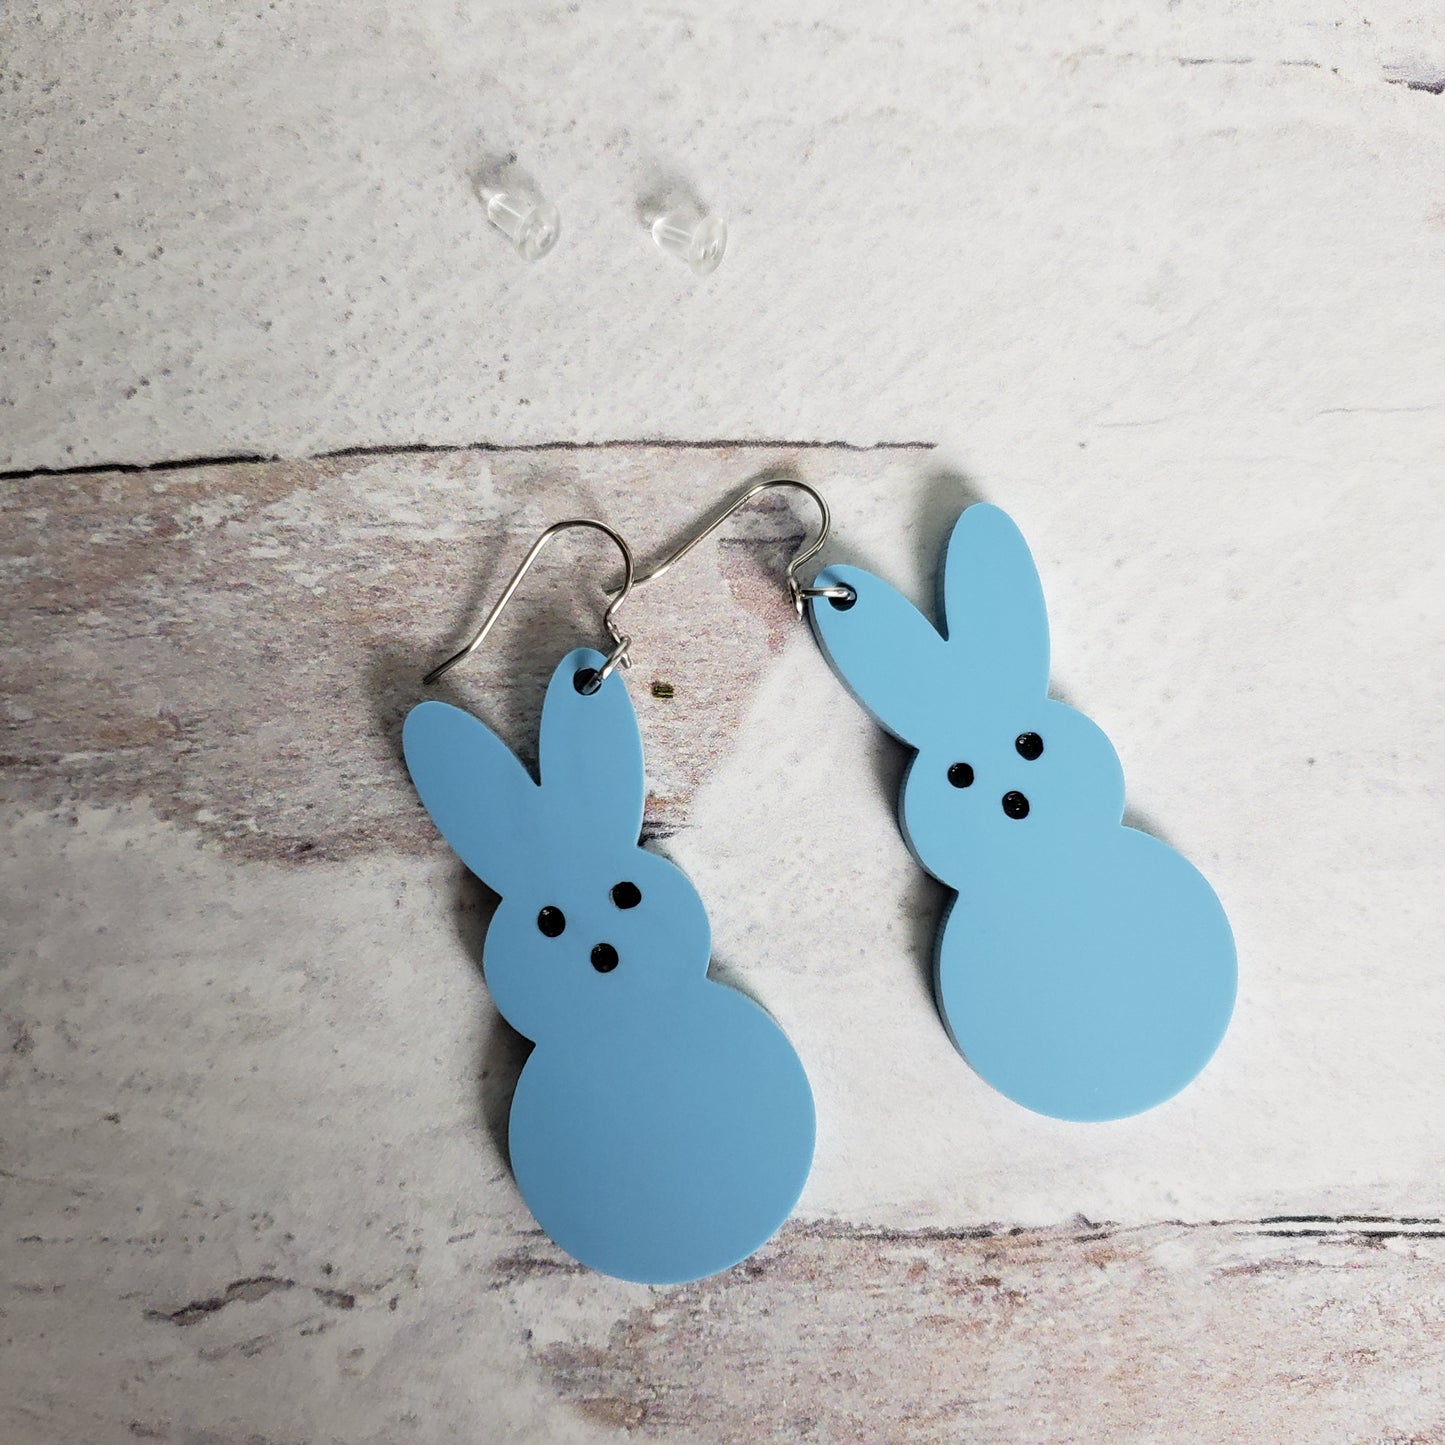 Matte pastel blue Marshmallow Bunny Earrings on stainless earring wires.